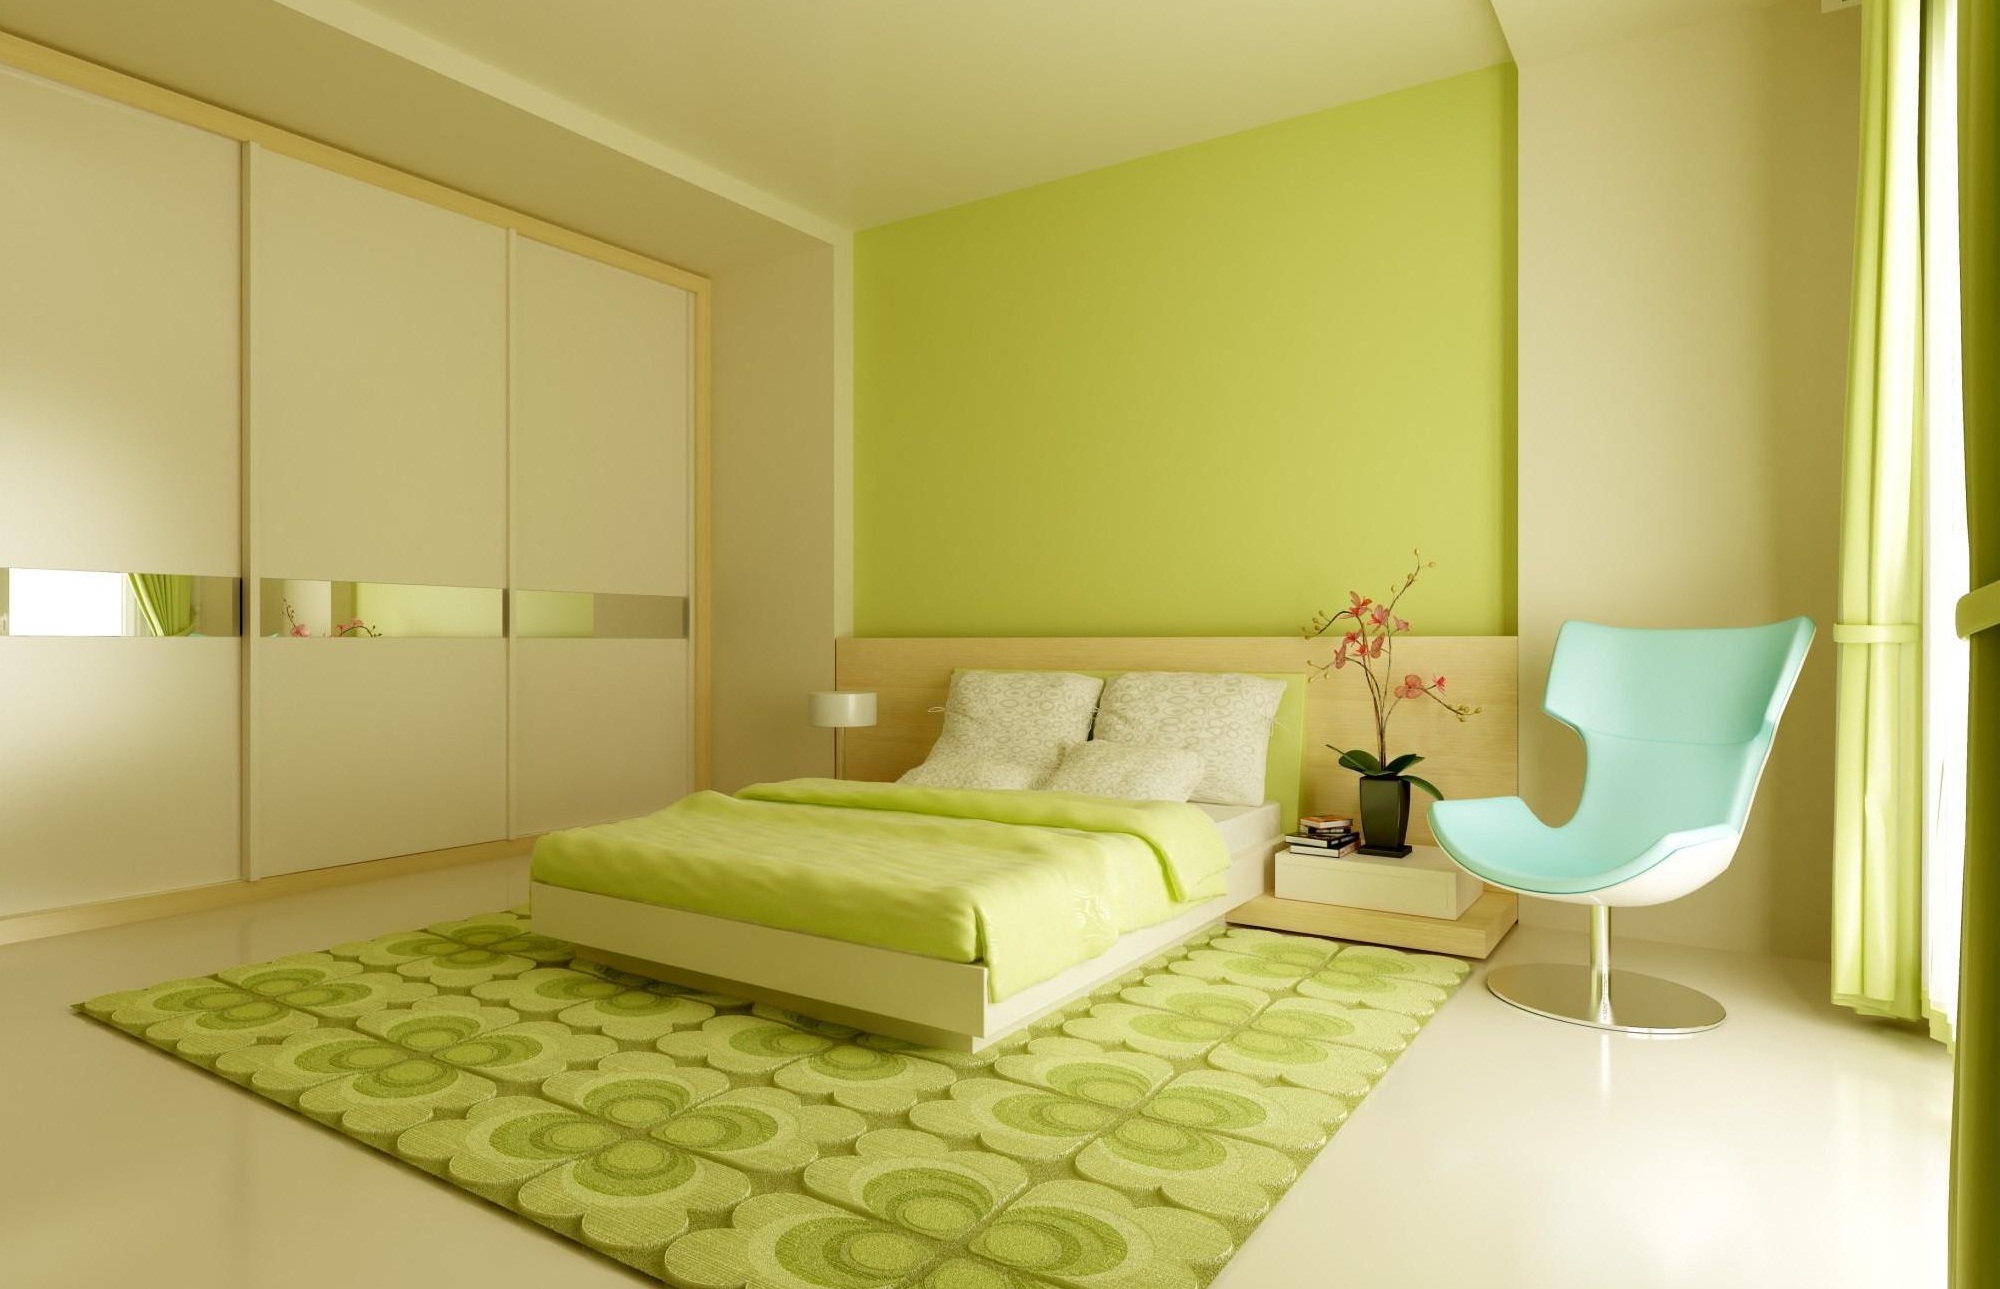 Green Duvet Elegant Beautiful Green Duvet Cover With Elegant Flower Vase In Simple Decorating Rooms For Adults And Amazing Blue Chair And Chic Green Rugs Bedroom  27 Enchanting And Awesome Bedroom Ideas For Young Adults